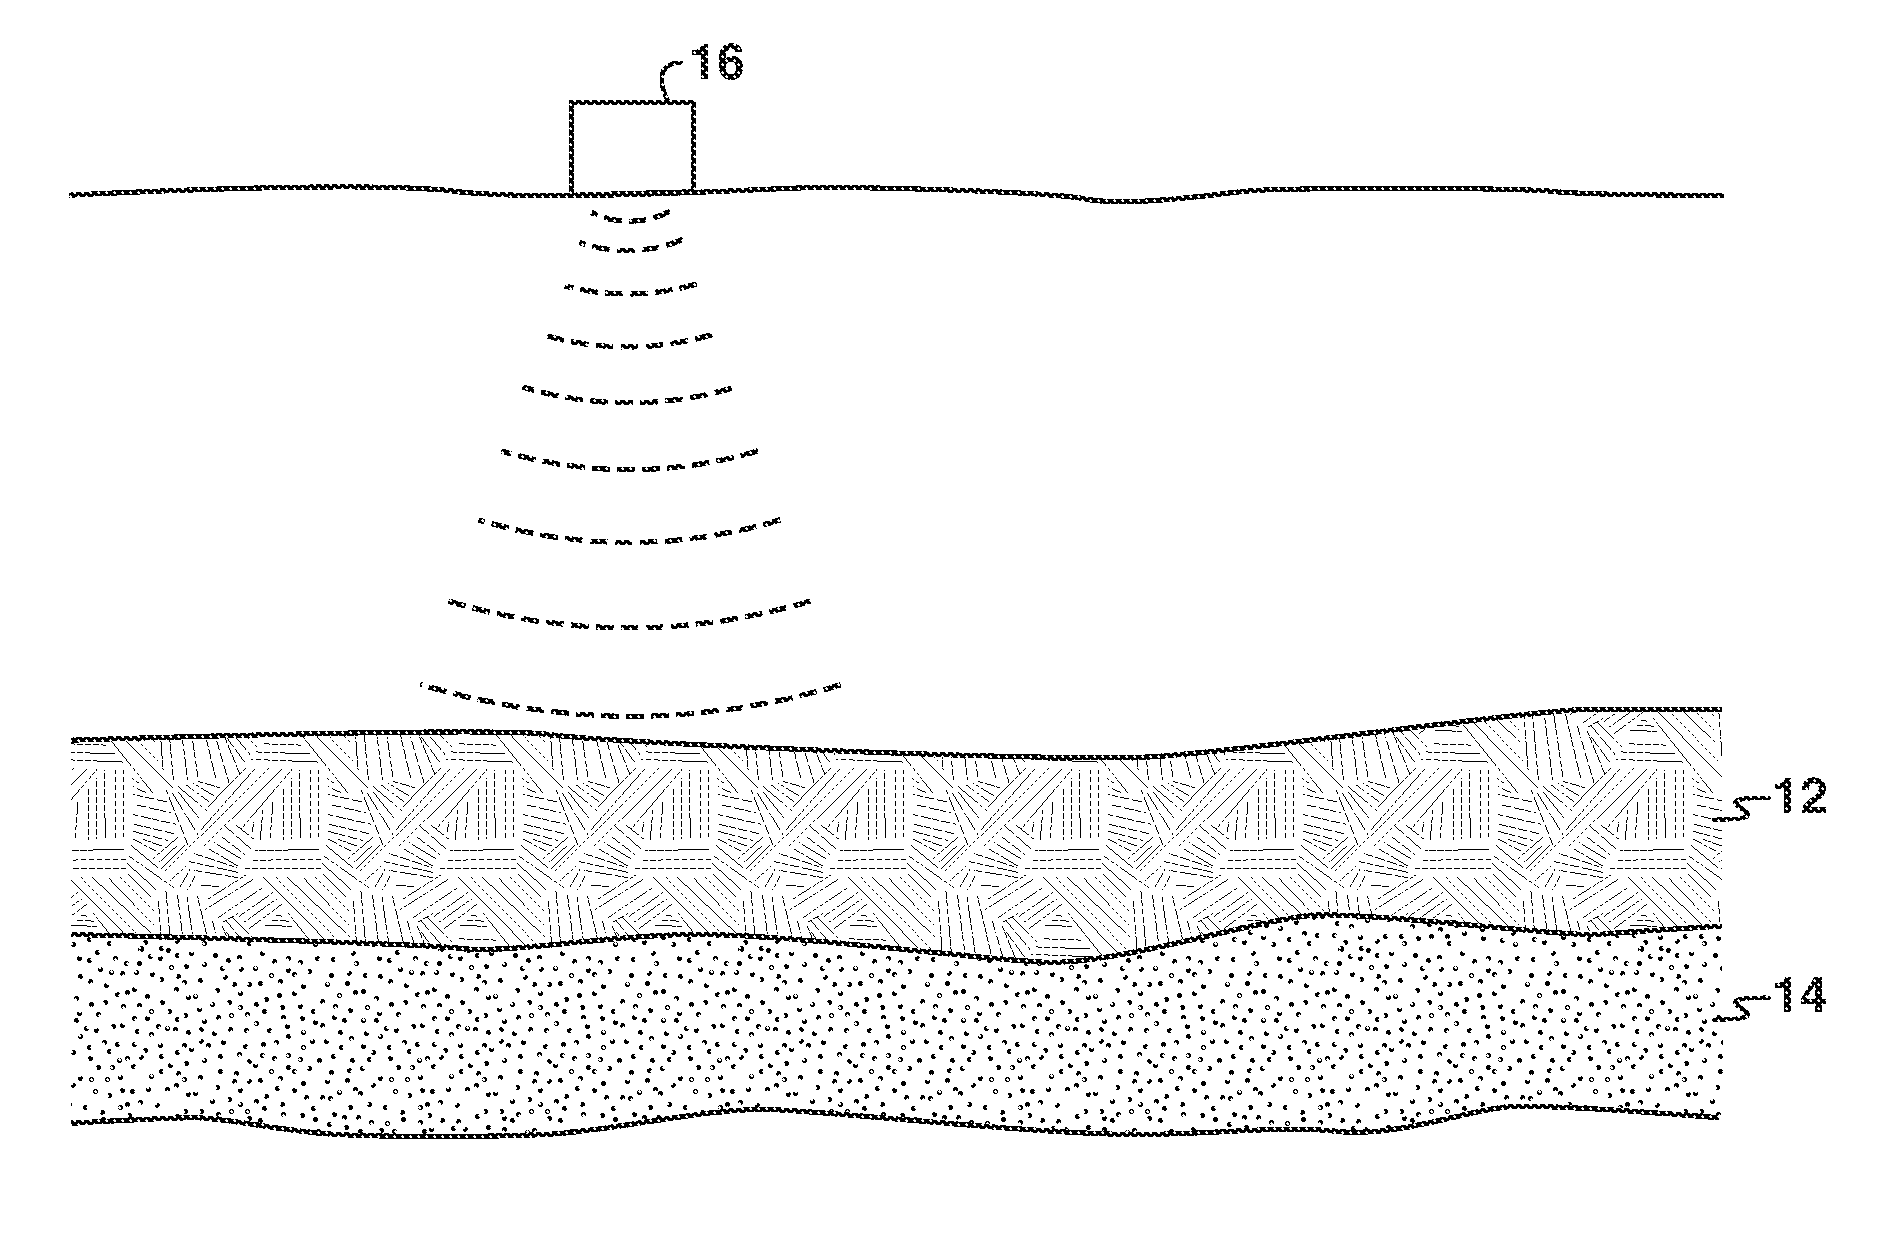 Method for Determining the Fluid/Pressure Distribution of Hydrocarbon Reservoirs from 4D Seismic Data